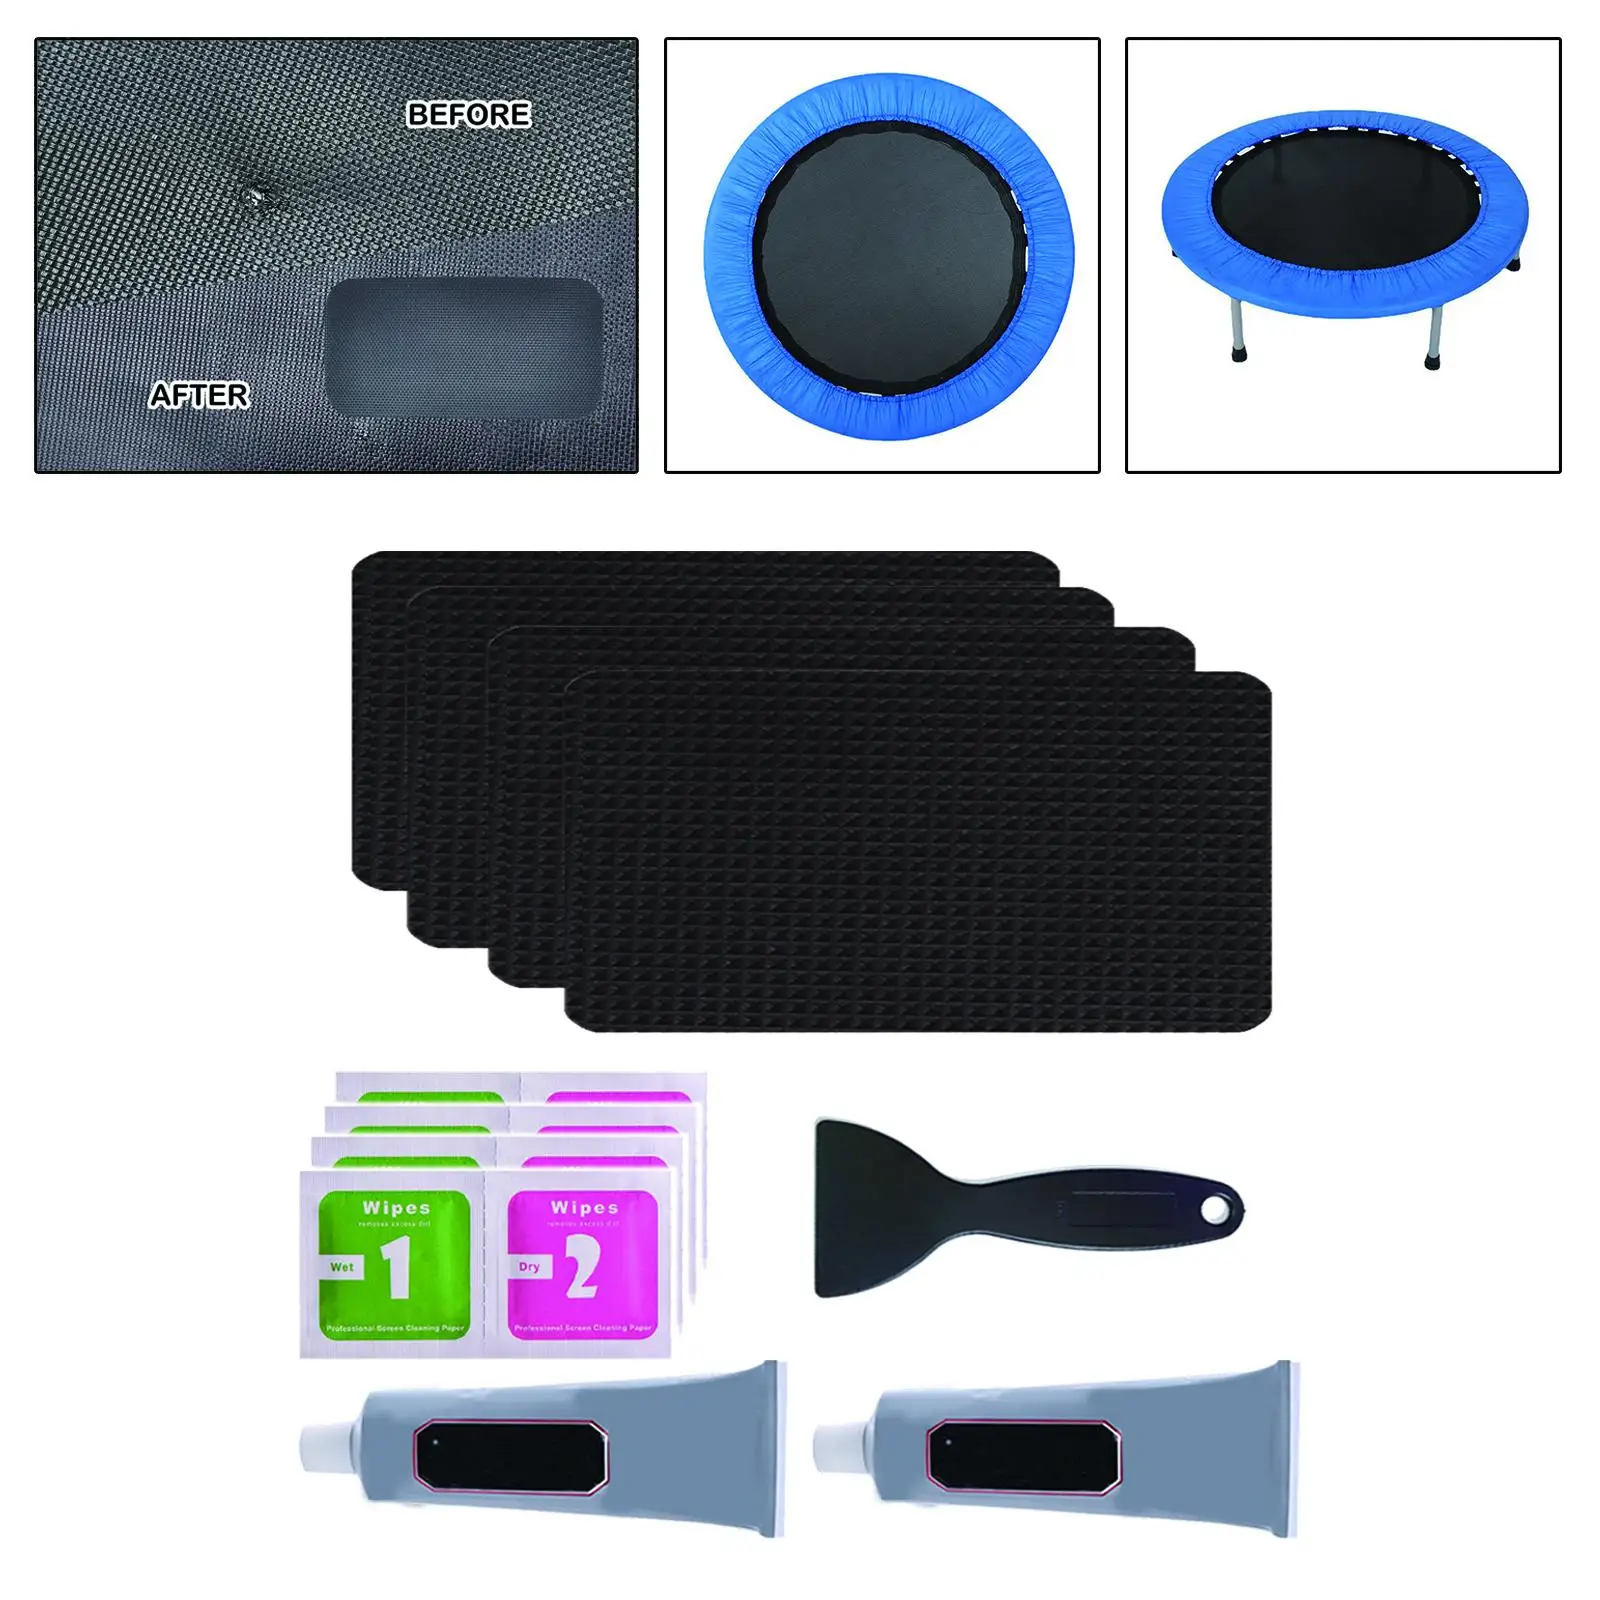 Trampoline Repair Kit Parts Rectangular on Patches for Waterproof Tents Awnings Trampoline Horse Rugs Inflatable Mattresses